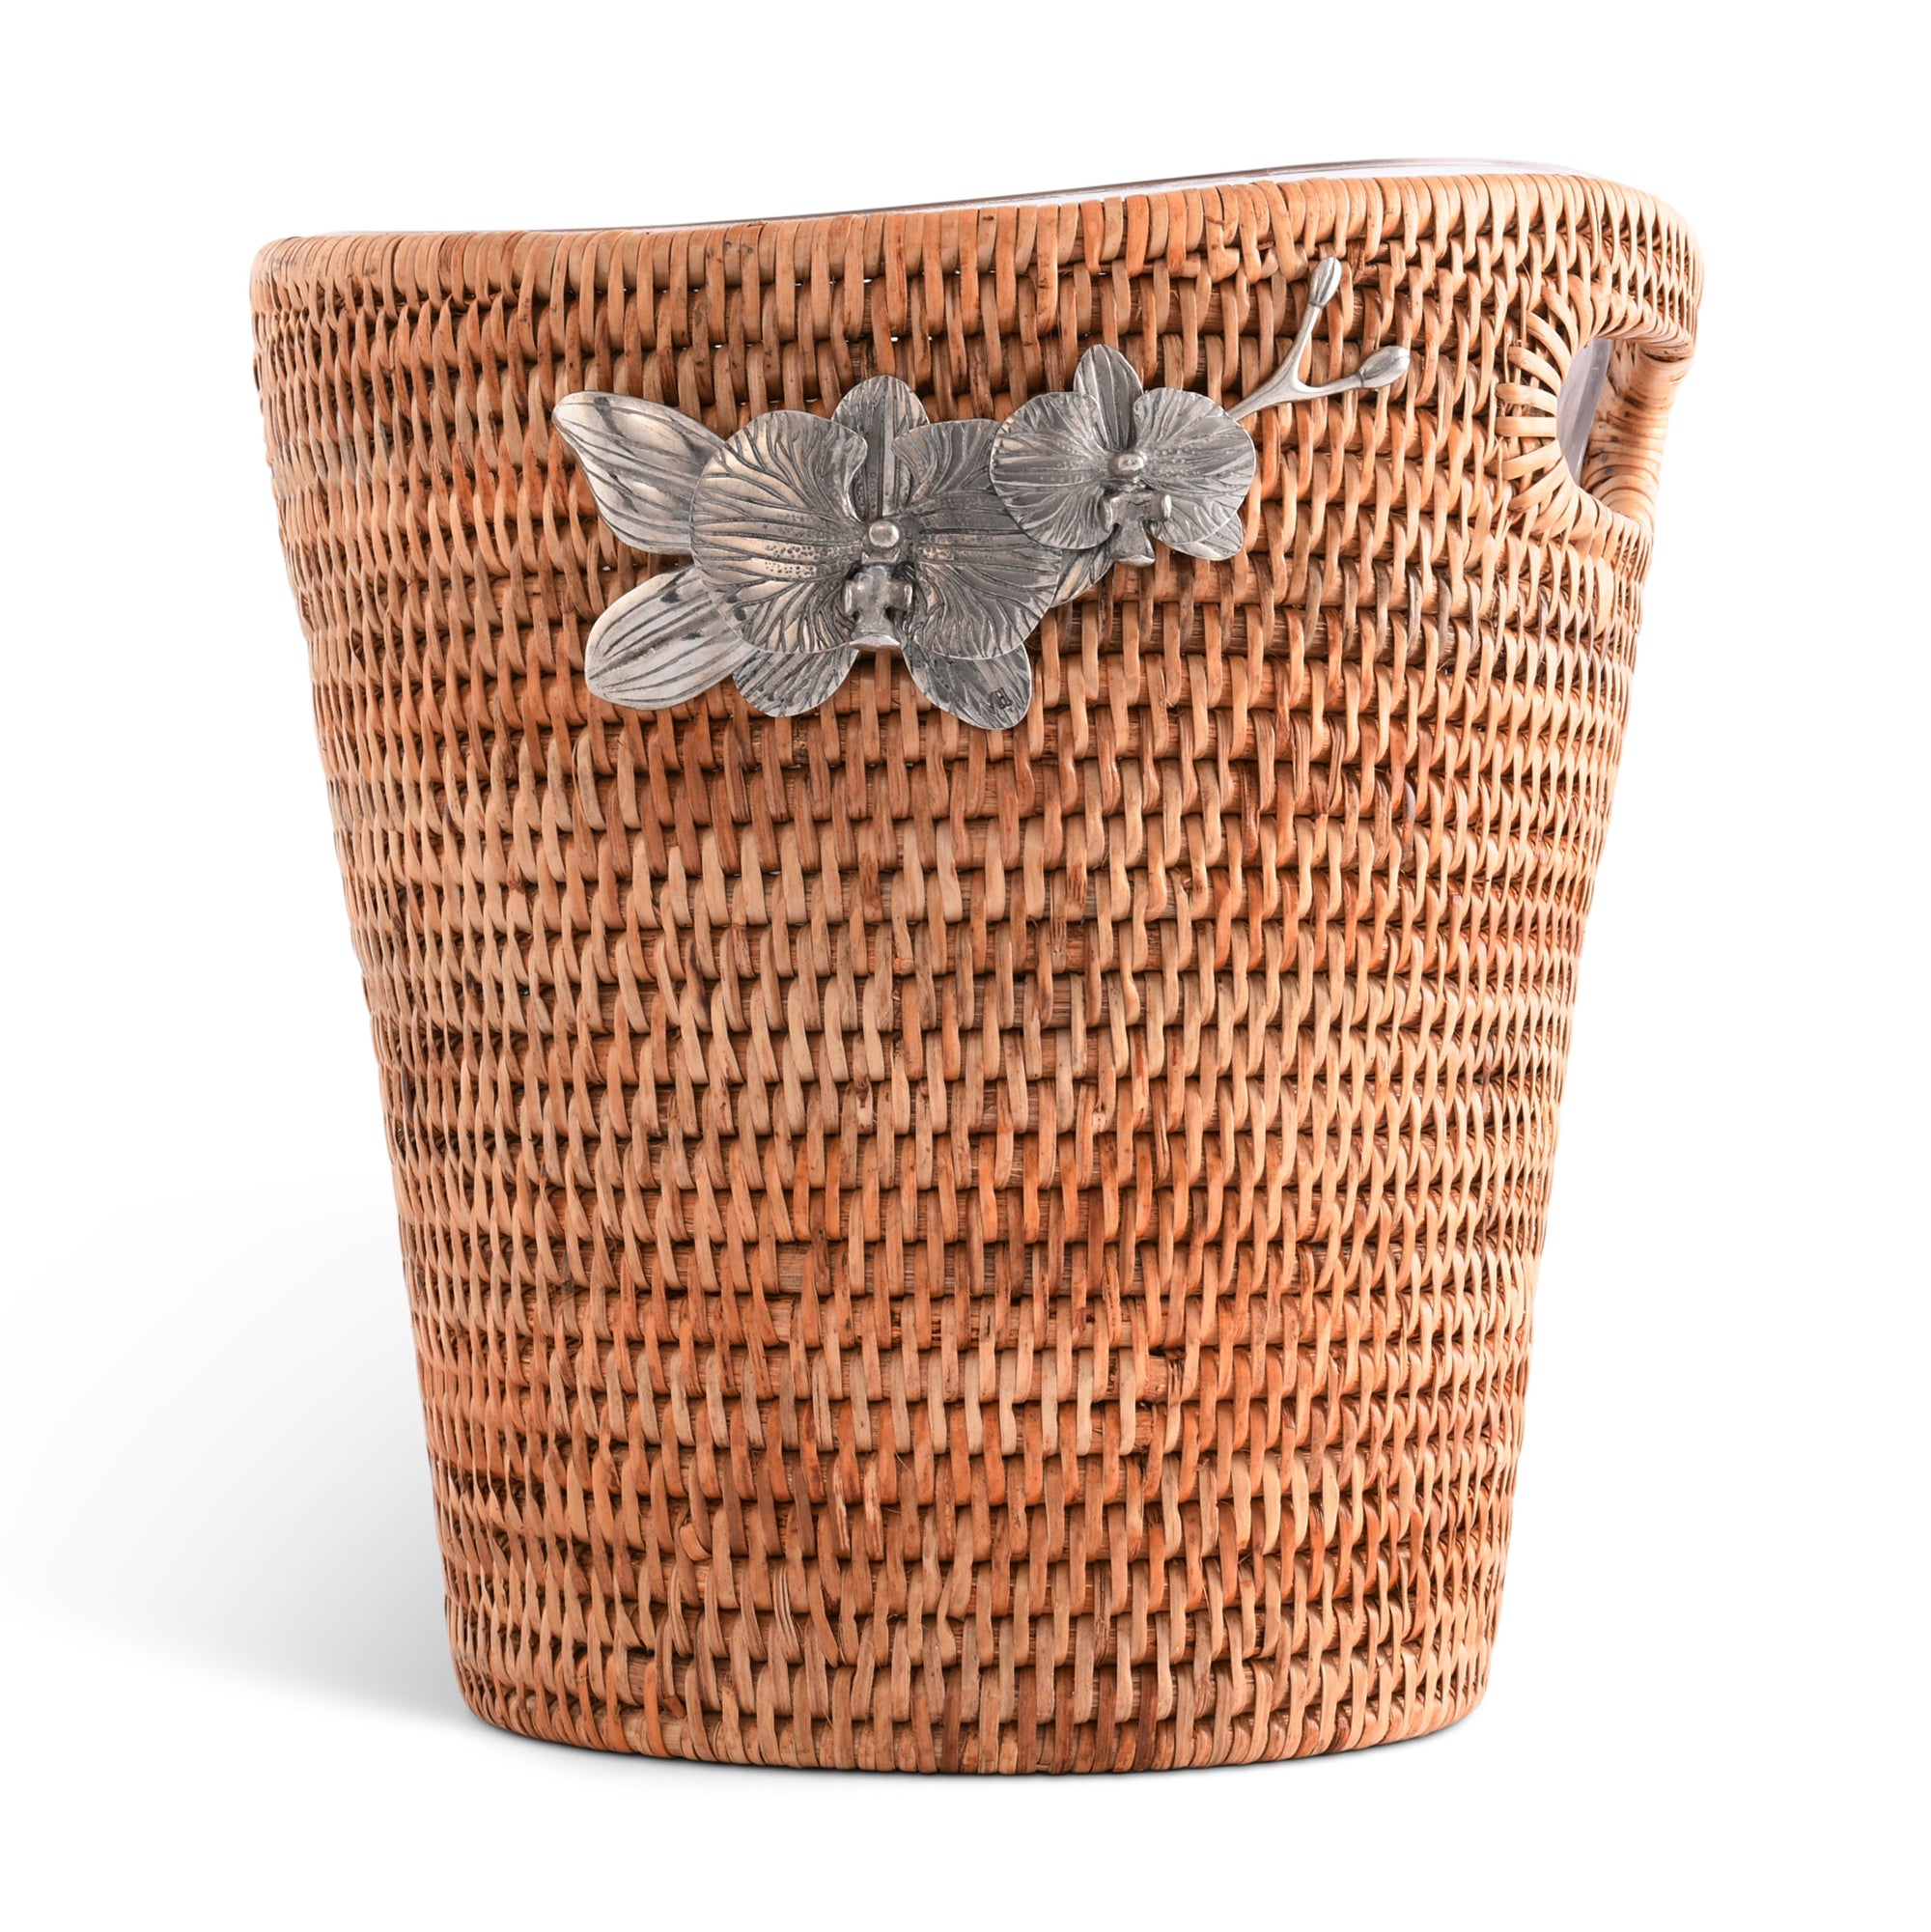 Vagabond House Orchids Hand Woven Wicker Rattan Champagne  / Ice Bucket Product Image